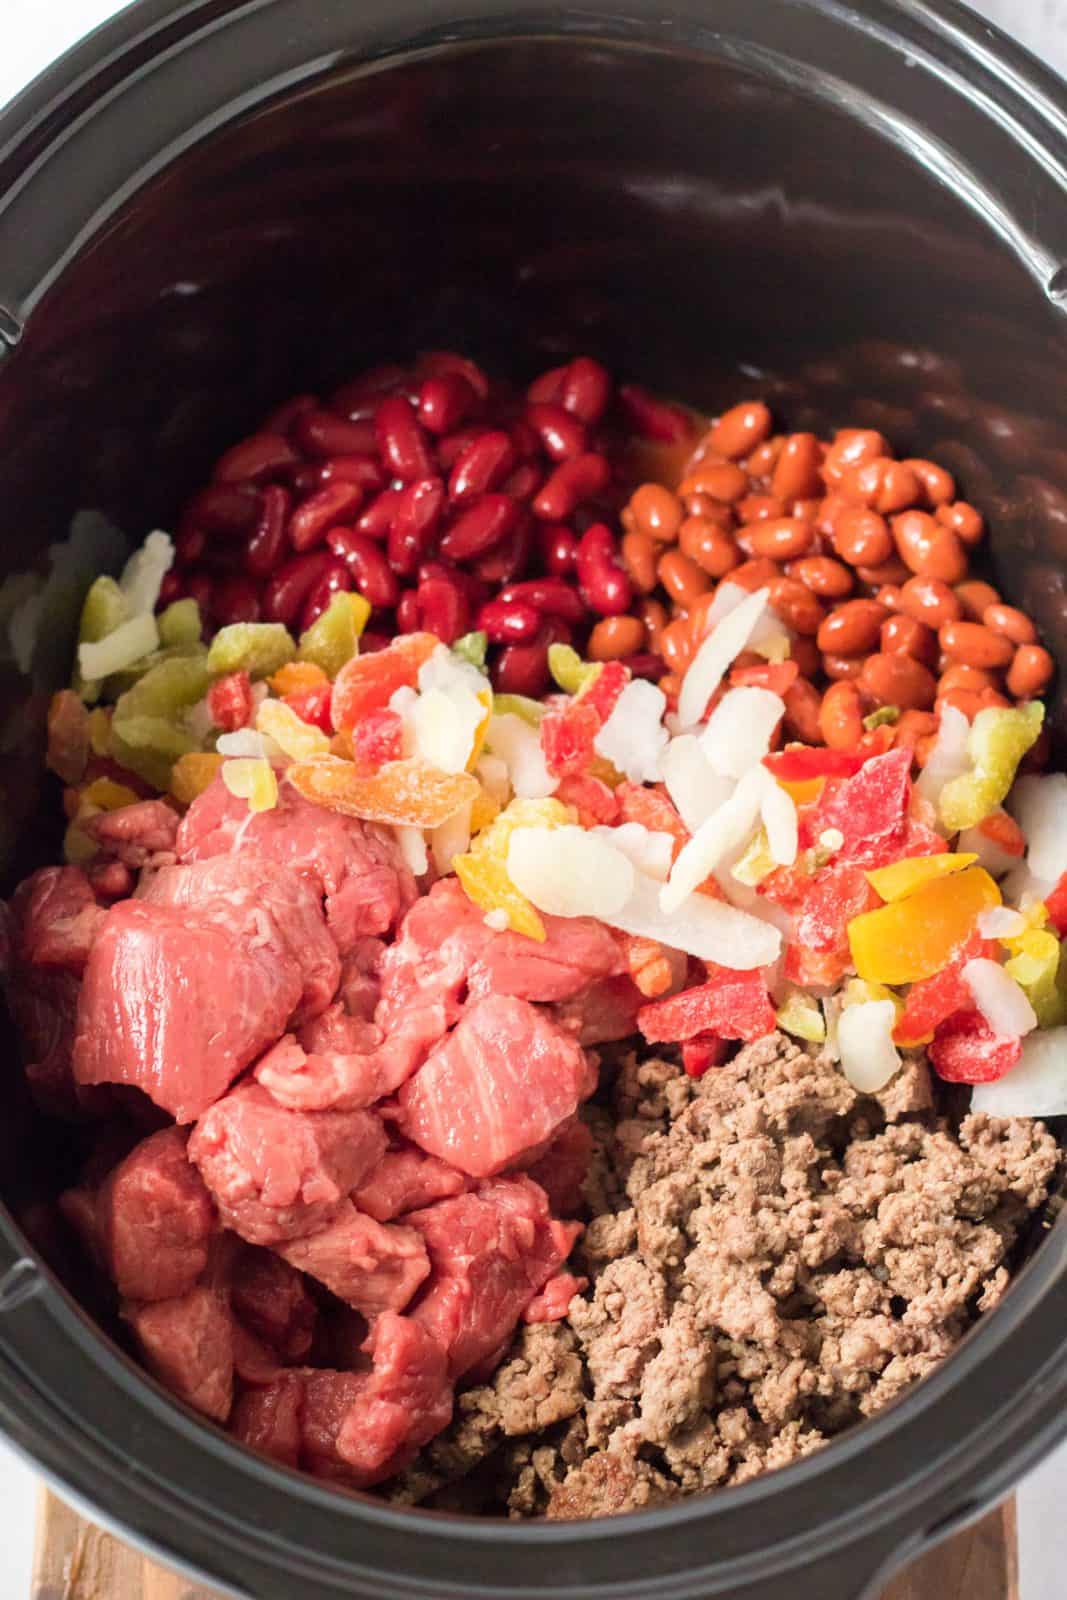 All ingredients added to slow cooker.